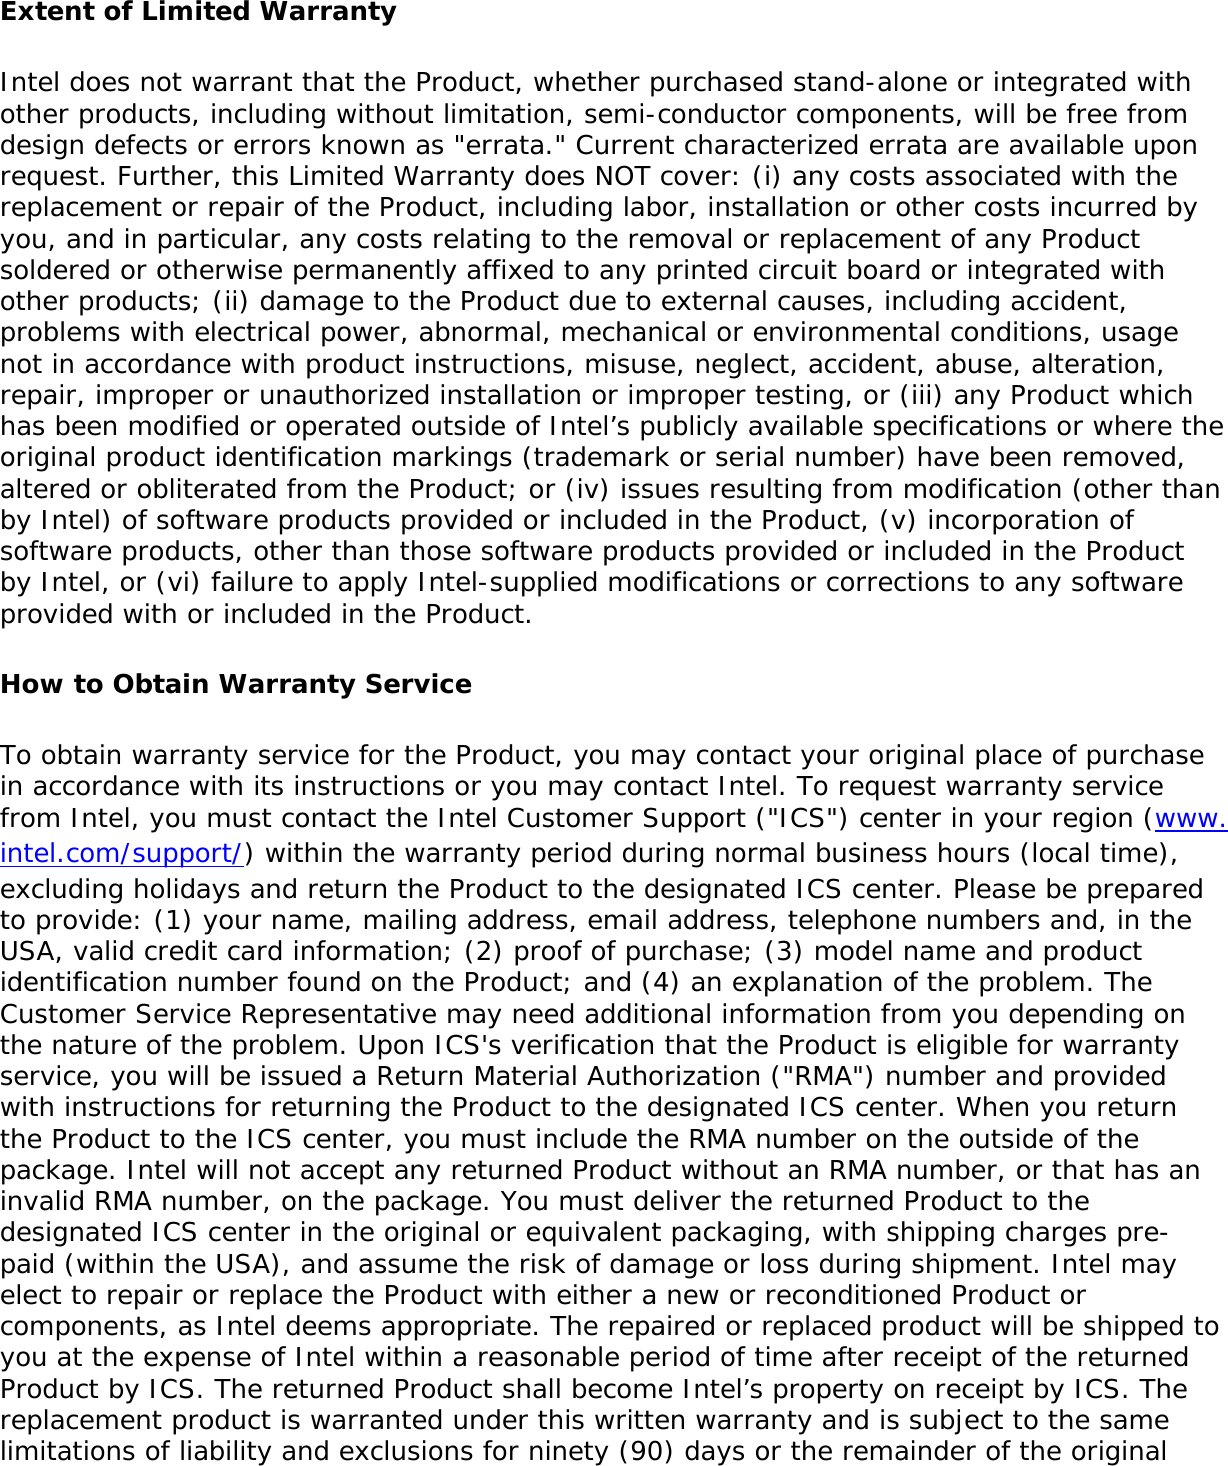 Extent of Limited WarrantyIntel does not warrant that the Product, whether purchased stand-alone or integrated with other products, including without limitation, semi-conductor components, will be free from design defects or errors known as &quot;errata.&quot; Current characterized errata are available upon request. Further, this Limited Warranty does NOT cover: (i) any costs associated with the replacement or repair of the Product, including labor, installation or other costs incurred by you, and in particular, any costs relating to the removal or replacement of any Product soldered or otherwise permanently affixed to any printed circuit board or integrated with other products; (ii) damage to the Product due to external causes, including accident, problems with electrical power, abnormal, mechanical or environmental conditions, usage not in accordance with product instructions, misuse, neglect, accident, abuse, alteration, repair, improper or unauthorized installation or improper testing, or (iii) any Product which has been modified or operated outside of Intel’s publicly available specifications or where the original product identification markings (trademark or serial number) have been removed, altered or obliterated from the Product; or (iv) issues resulting from modification (other than by Intel) of software products provided or included in the Product, (v) incorporation of software products, other than those software products provided or included in the Product by Intel, or (vi) failure to apply Intel-supplied modifications or corrections to any software provided with or included in the Product.How to Obtain Warranty ServiceTo obtain warranty service for the Product, you may contact your original place of purchase in accordance with its instructions or you may contact Intel. To request warranty service from Intel, you must contact the Intel Customer Support (&quot;ICS&quot;) center in your region (www.intel.com/support/) within the warranty period during normal business hours (local time), excluding holidays and return the Product to the designated ICS center. Please be prepared to provide: (1) your name, mailing address, email address, telephone numbers and, in the USA, valid credit card information; (2) proof of purchase; (3) model name and product identification number found on the Product; and (4) an explanation of the problem. The Customer Service Representative may need additional information from you depending on the nature of the problem. Upon ICS&apos;s verification that the Product is eligible for warranty service, you will be issued a Return Material Authorization (&quot;RMA&quot;) number and provided with instructions for returning the Product to the designated ICS center. When you return the Product to the ICS center, you must include the RMA number on the outside of the package. Intel will not accept any returned Product without an RMA number, or that has an invalid RMA number, on the package. You must deliver the returned Product to the designated ICS center in the original or equivalent packaging, with shipping charges pre-paid (within the USA), and assume the risk of damage or loss during shipment. Intel may elect to repair or replace the Product with either a new or reconditioned Product or components, as Intel deems appropriate. The repaired or replaced product will be shipped to you at the expense of Intel within a reasonable period of time after receipt of the returned Product by ICS. The returned Product shall become Intel’s property on receipt by ICS. The replacement product is warranted under this written warranty and is subject to the same limitations of liability and exclusions for ninety (90) days or the remainder of the original 